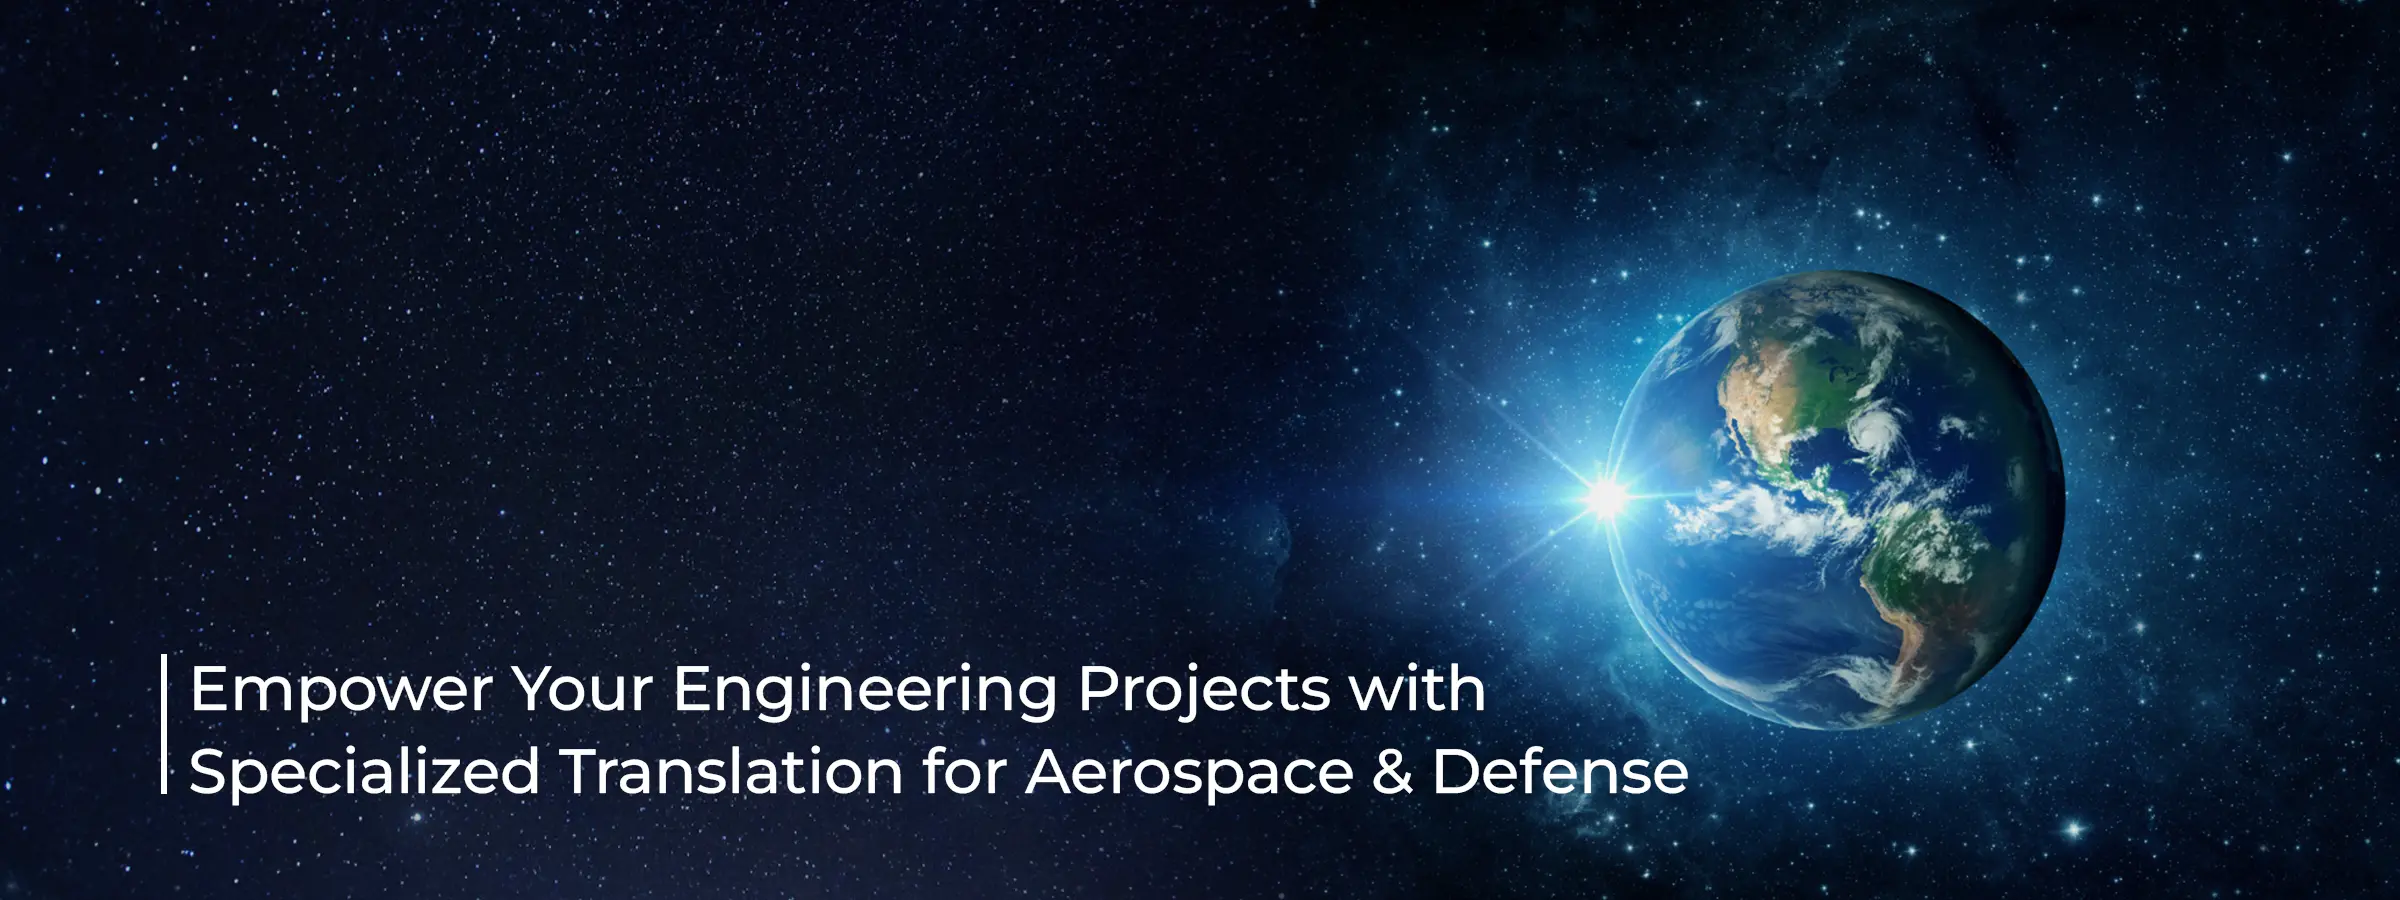 empower-your-engineering-projects-with-specialized-translation-for-aerospace-defense